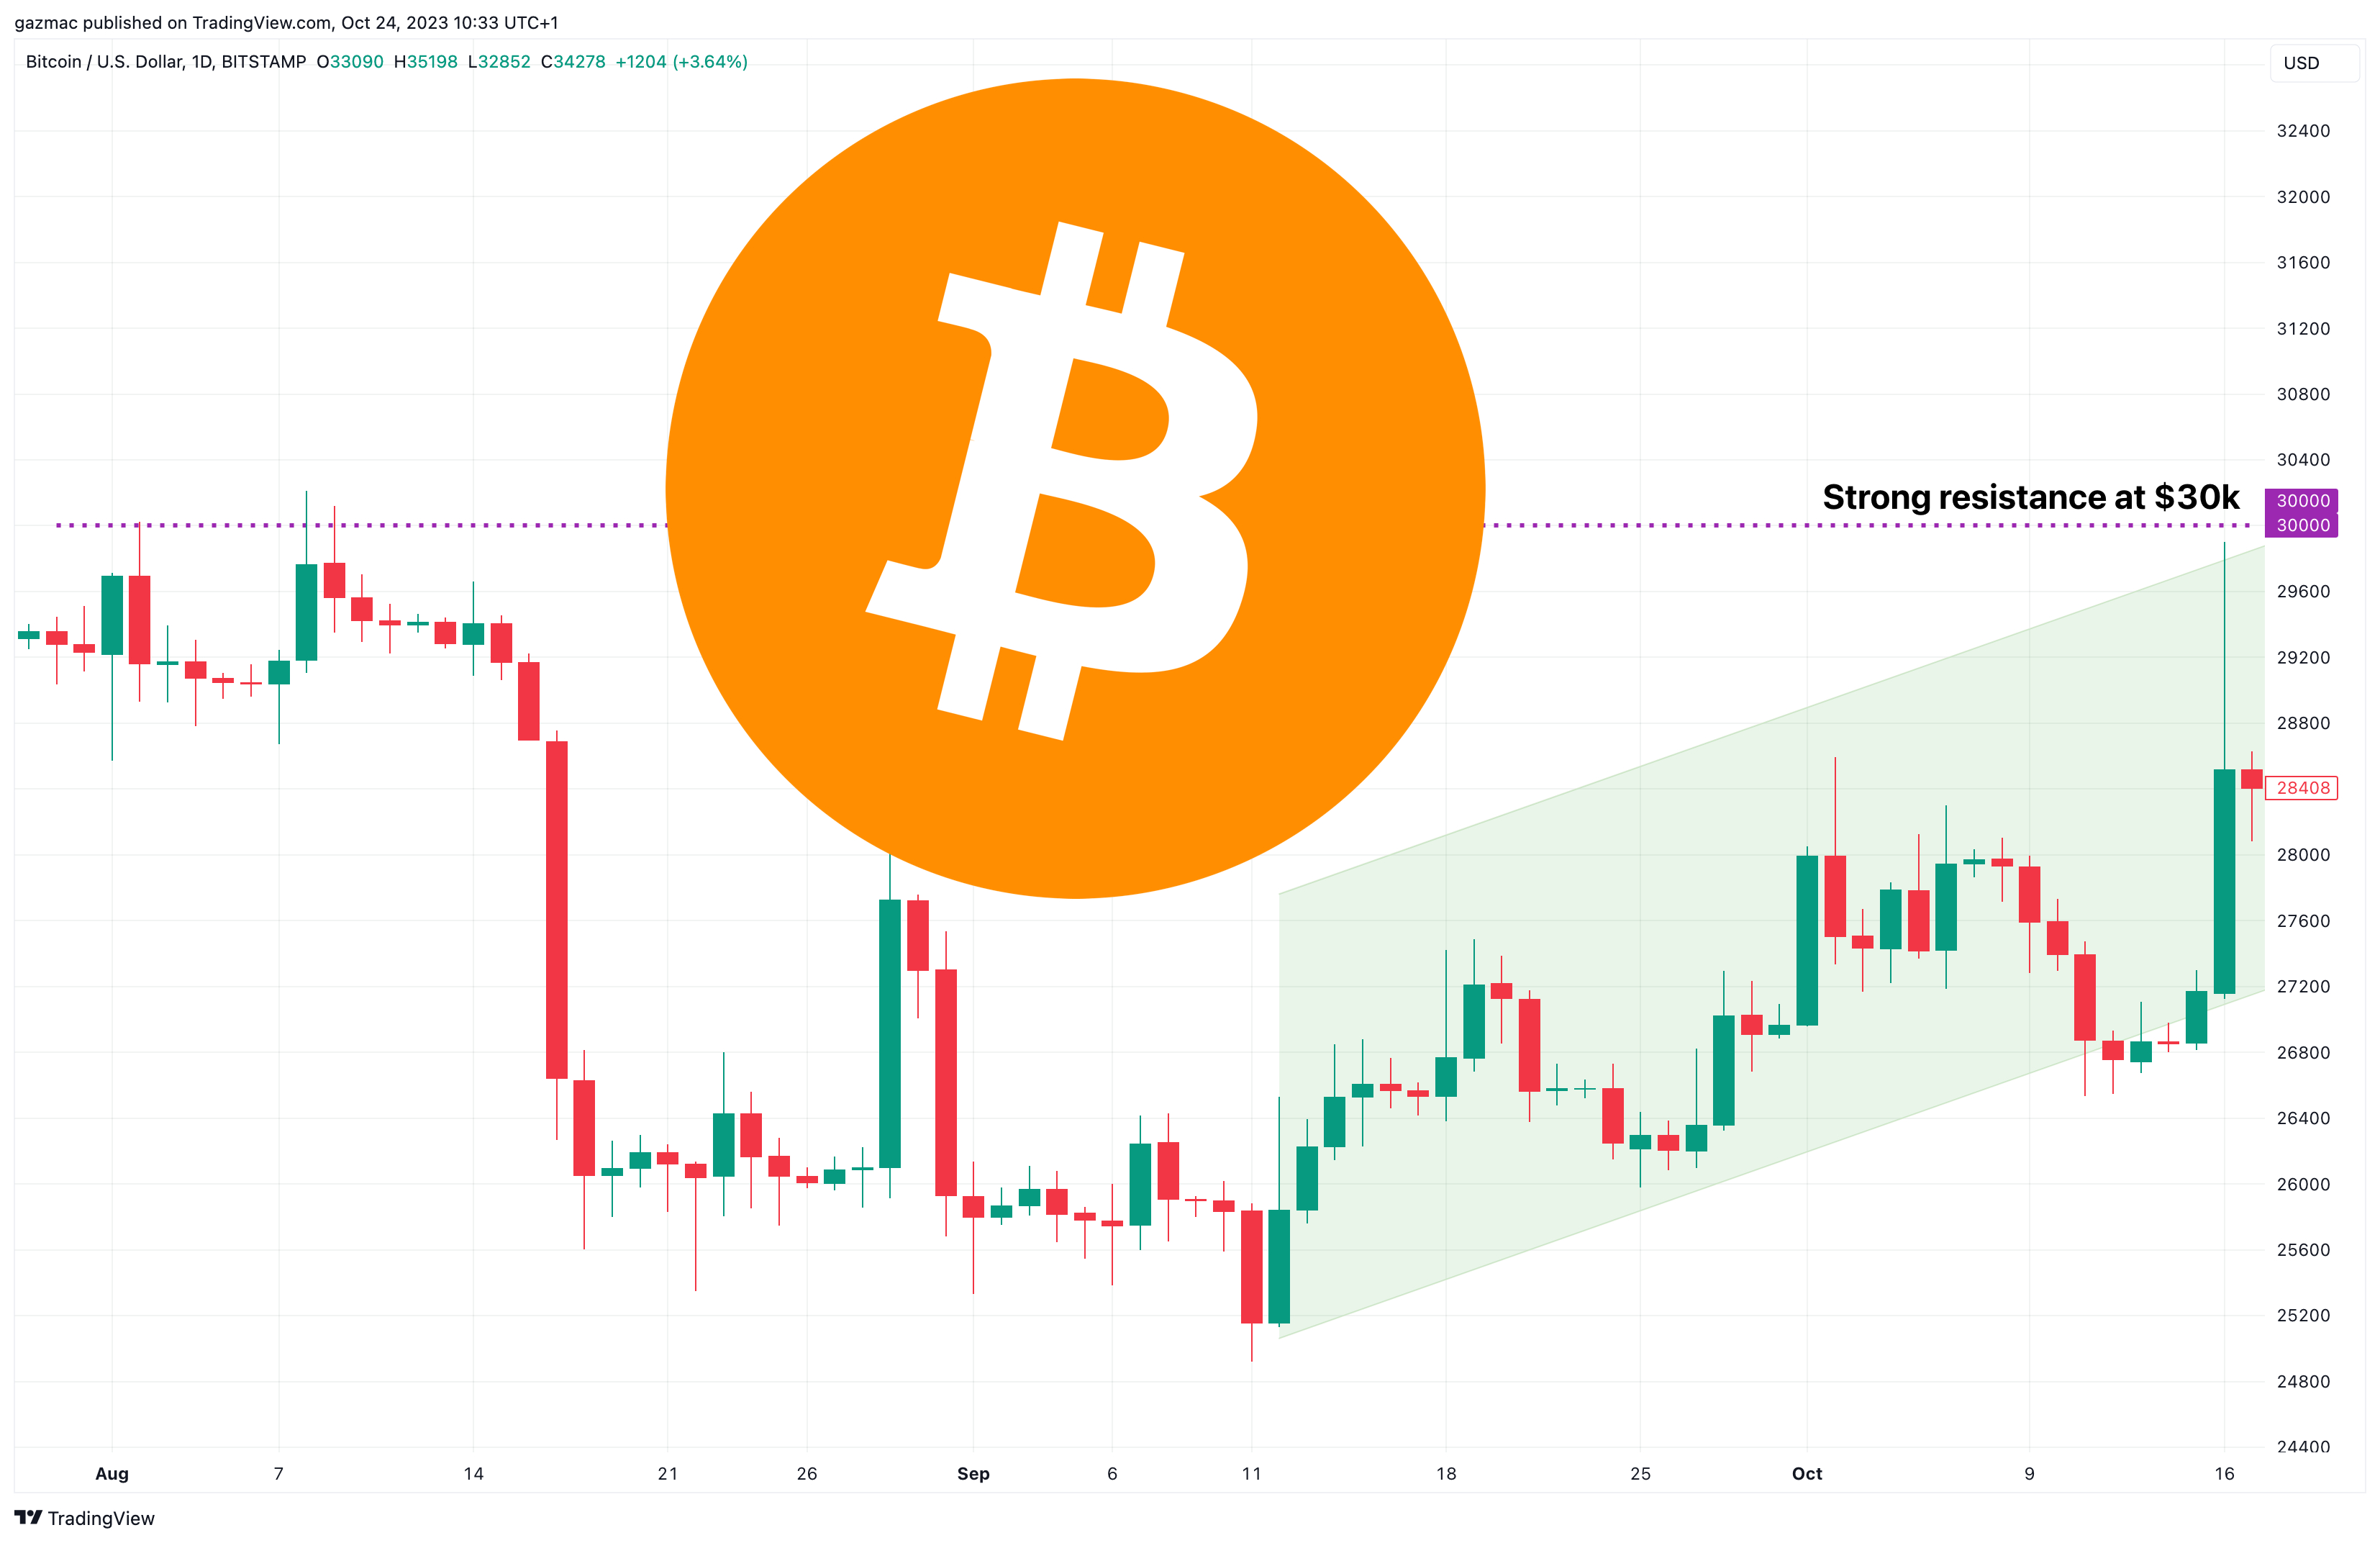 btcusd price chart - strong resistance at $30k